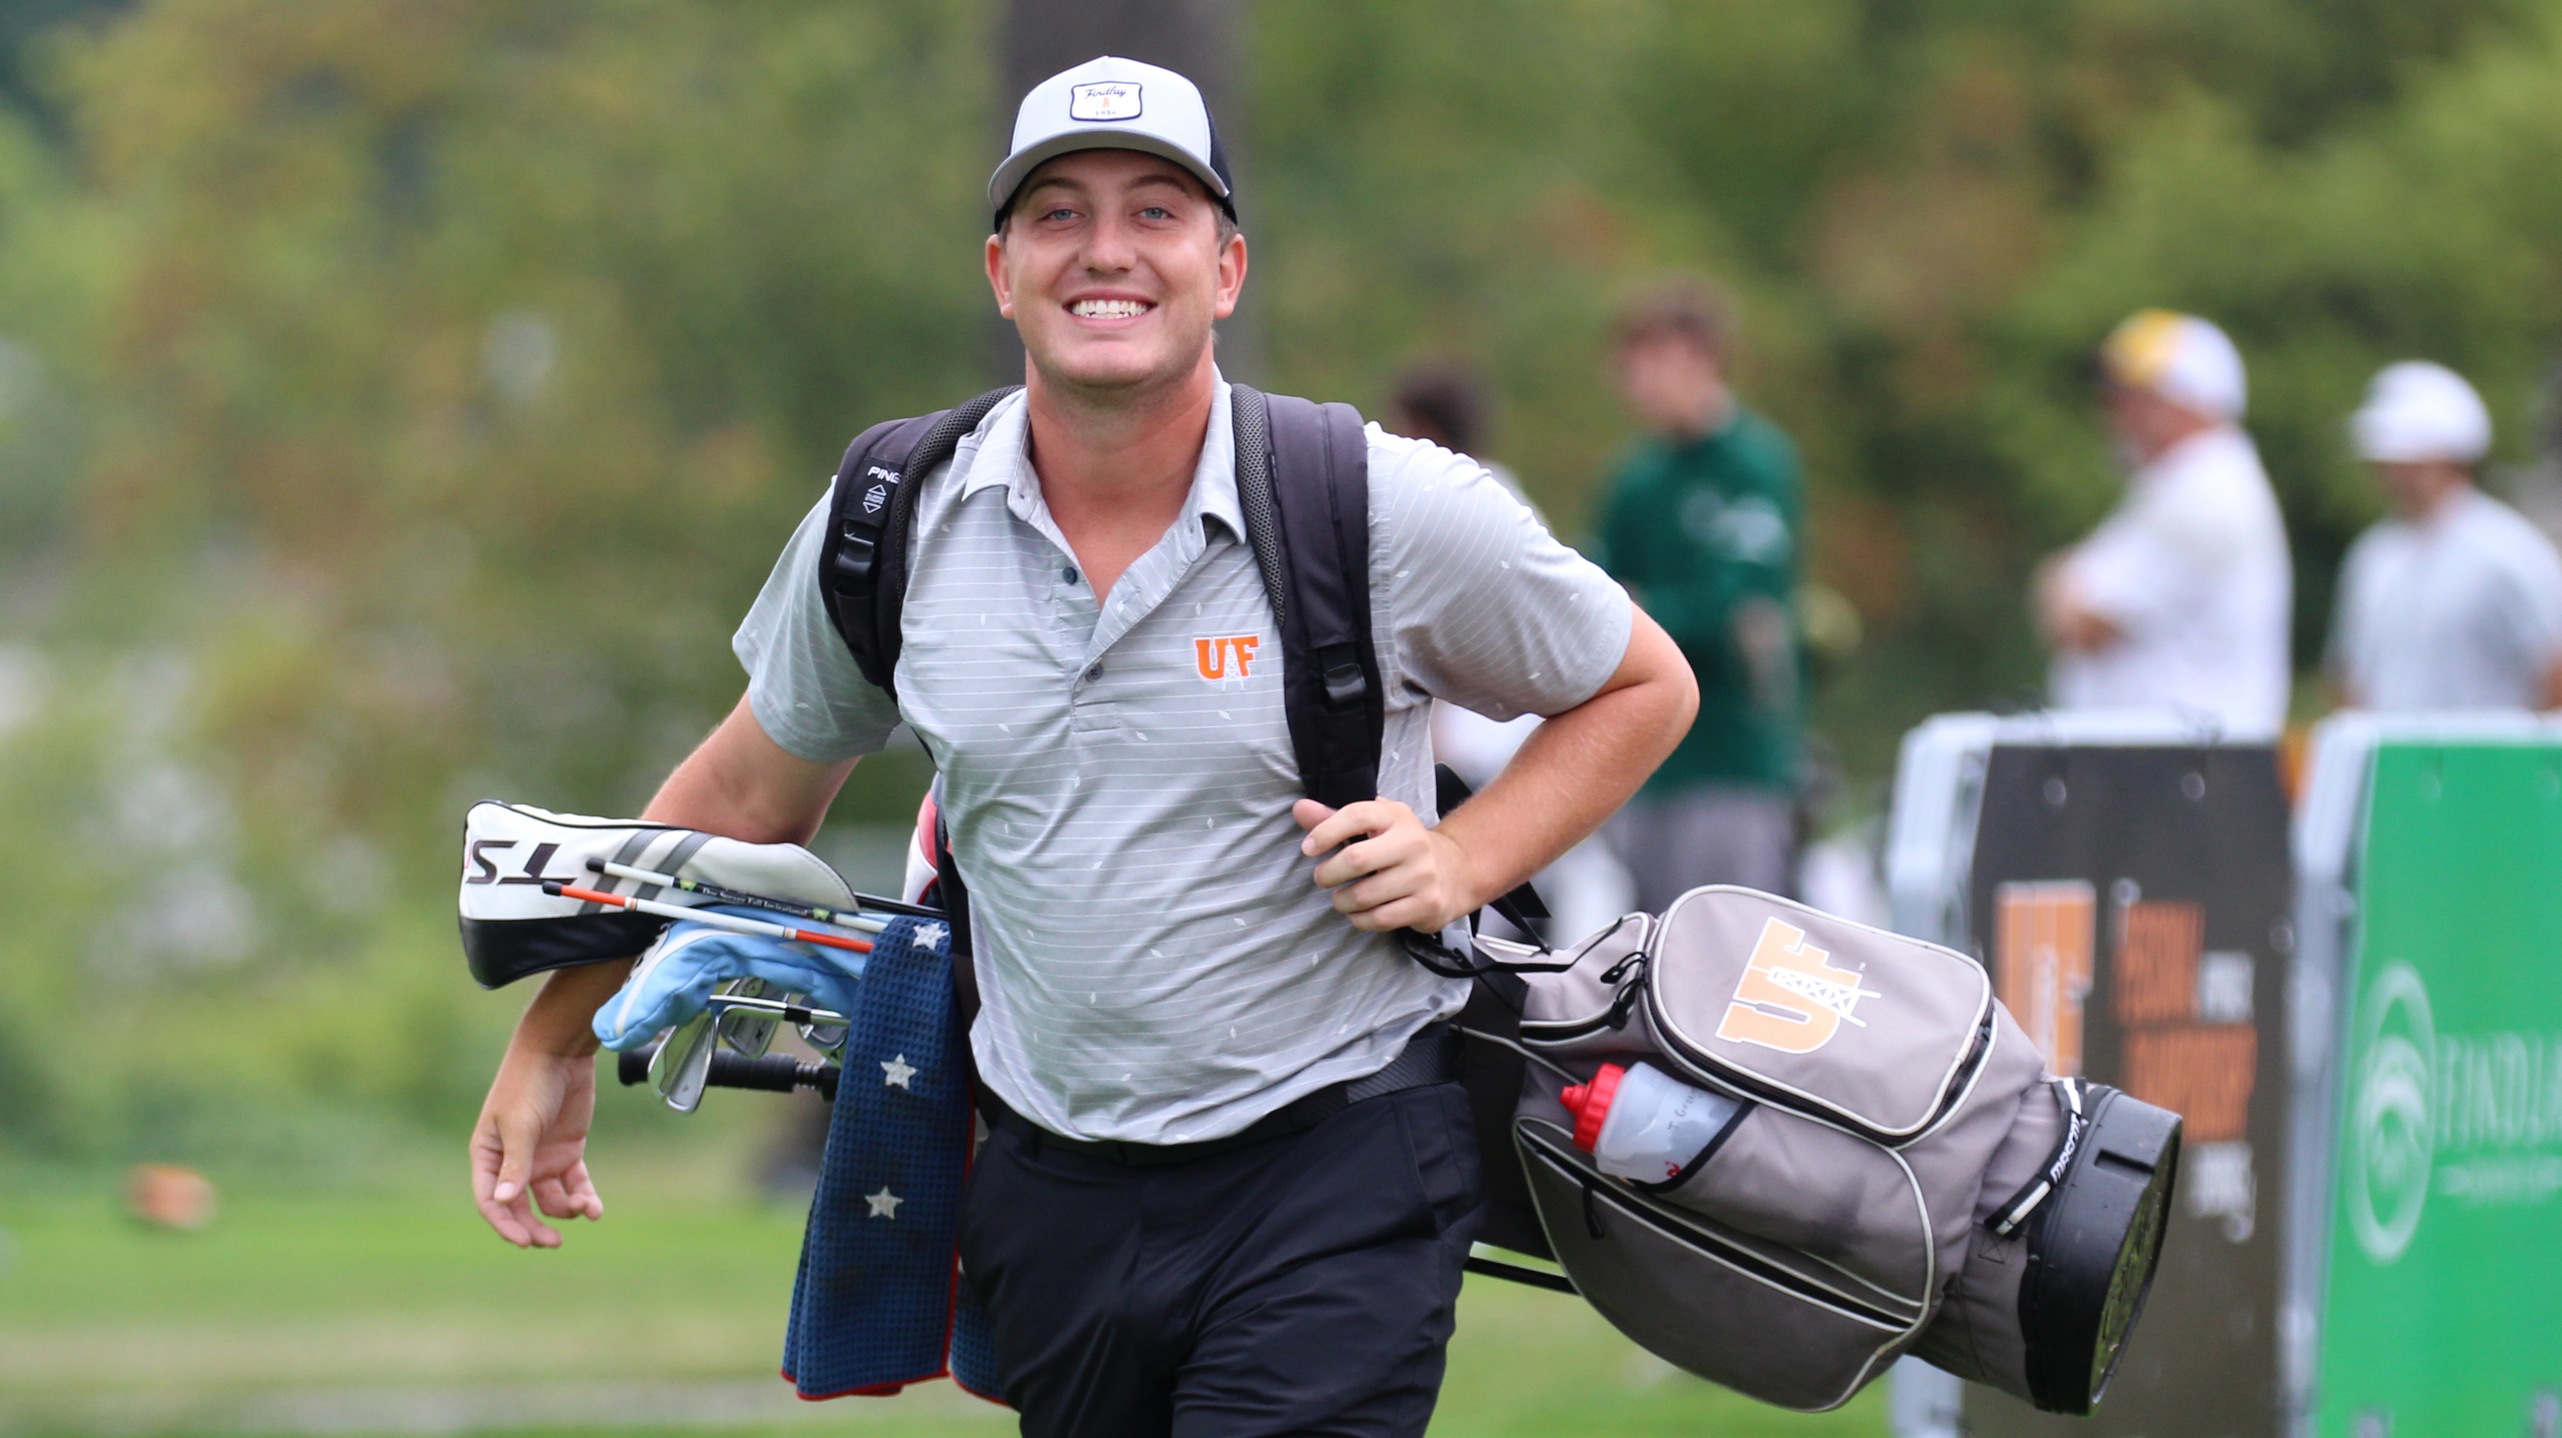 Player smiles while walking on course. 